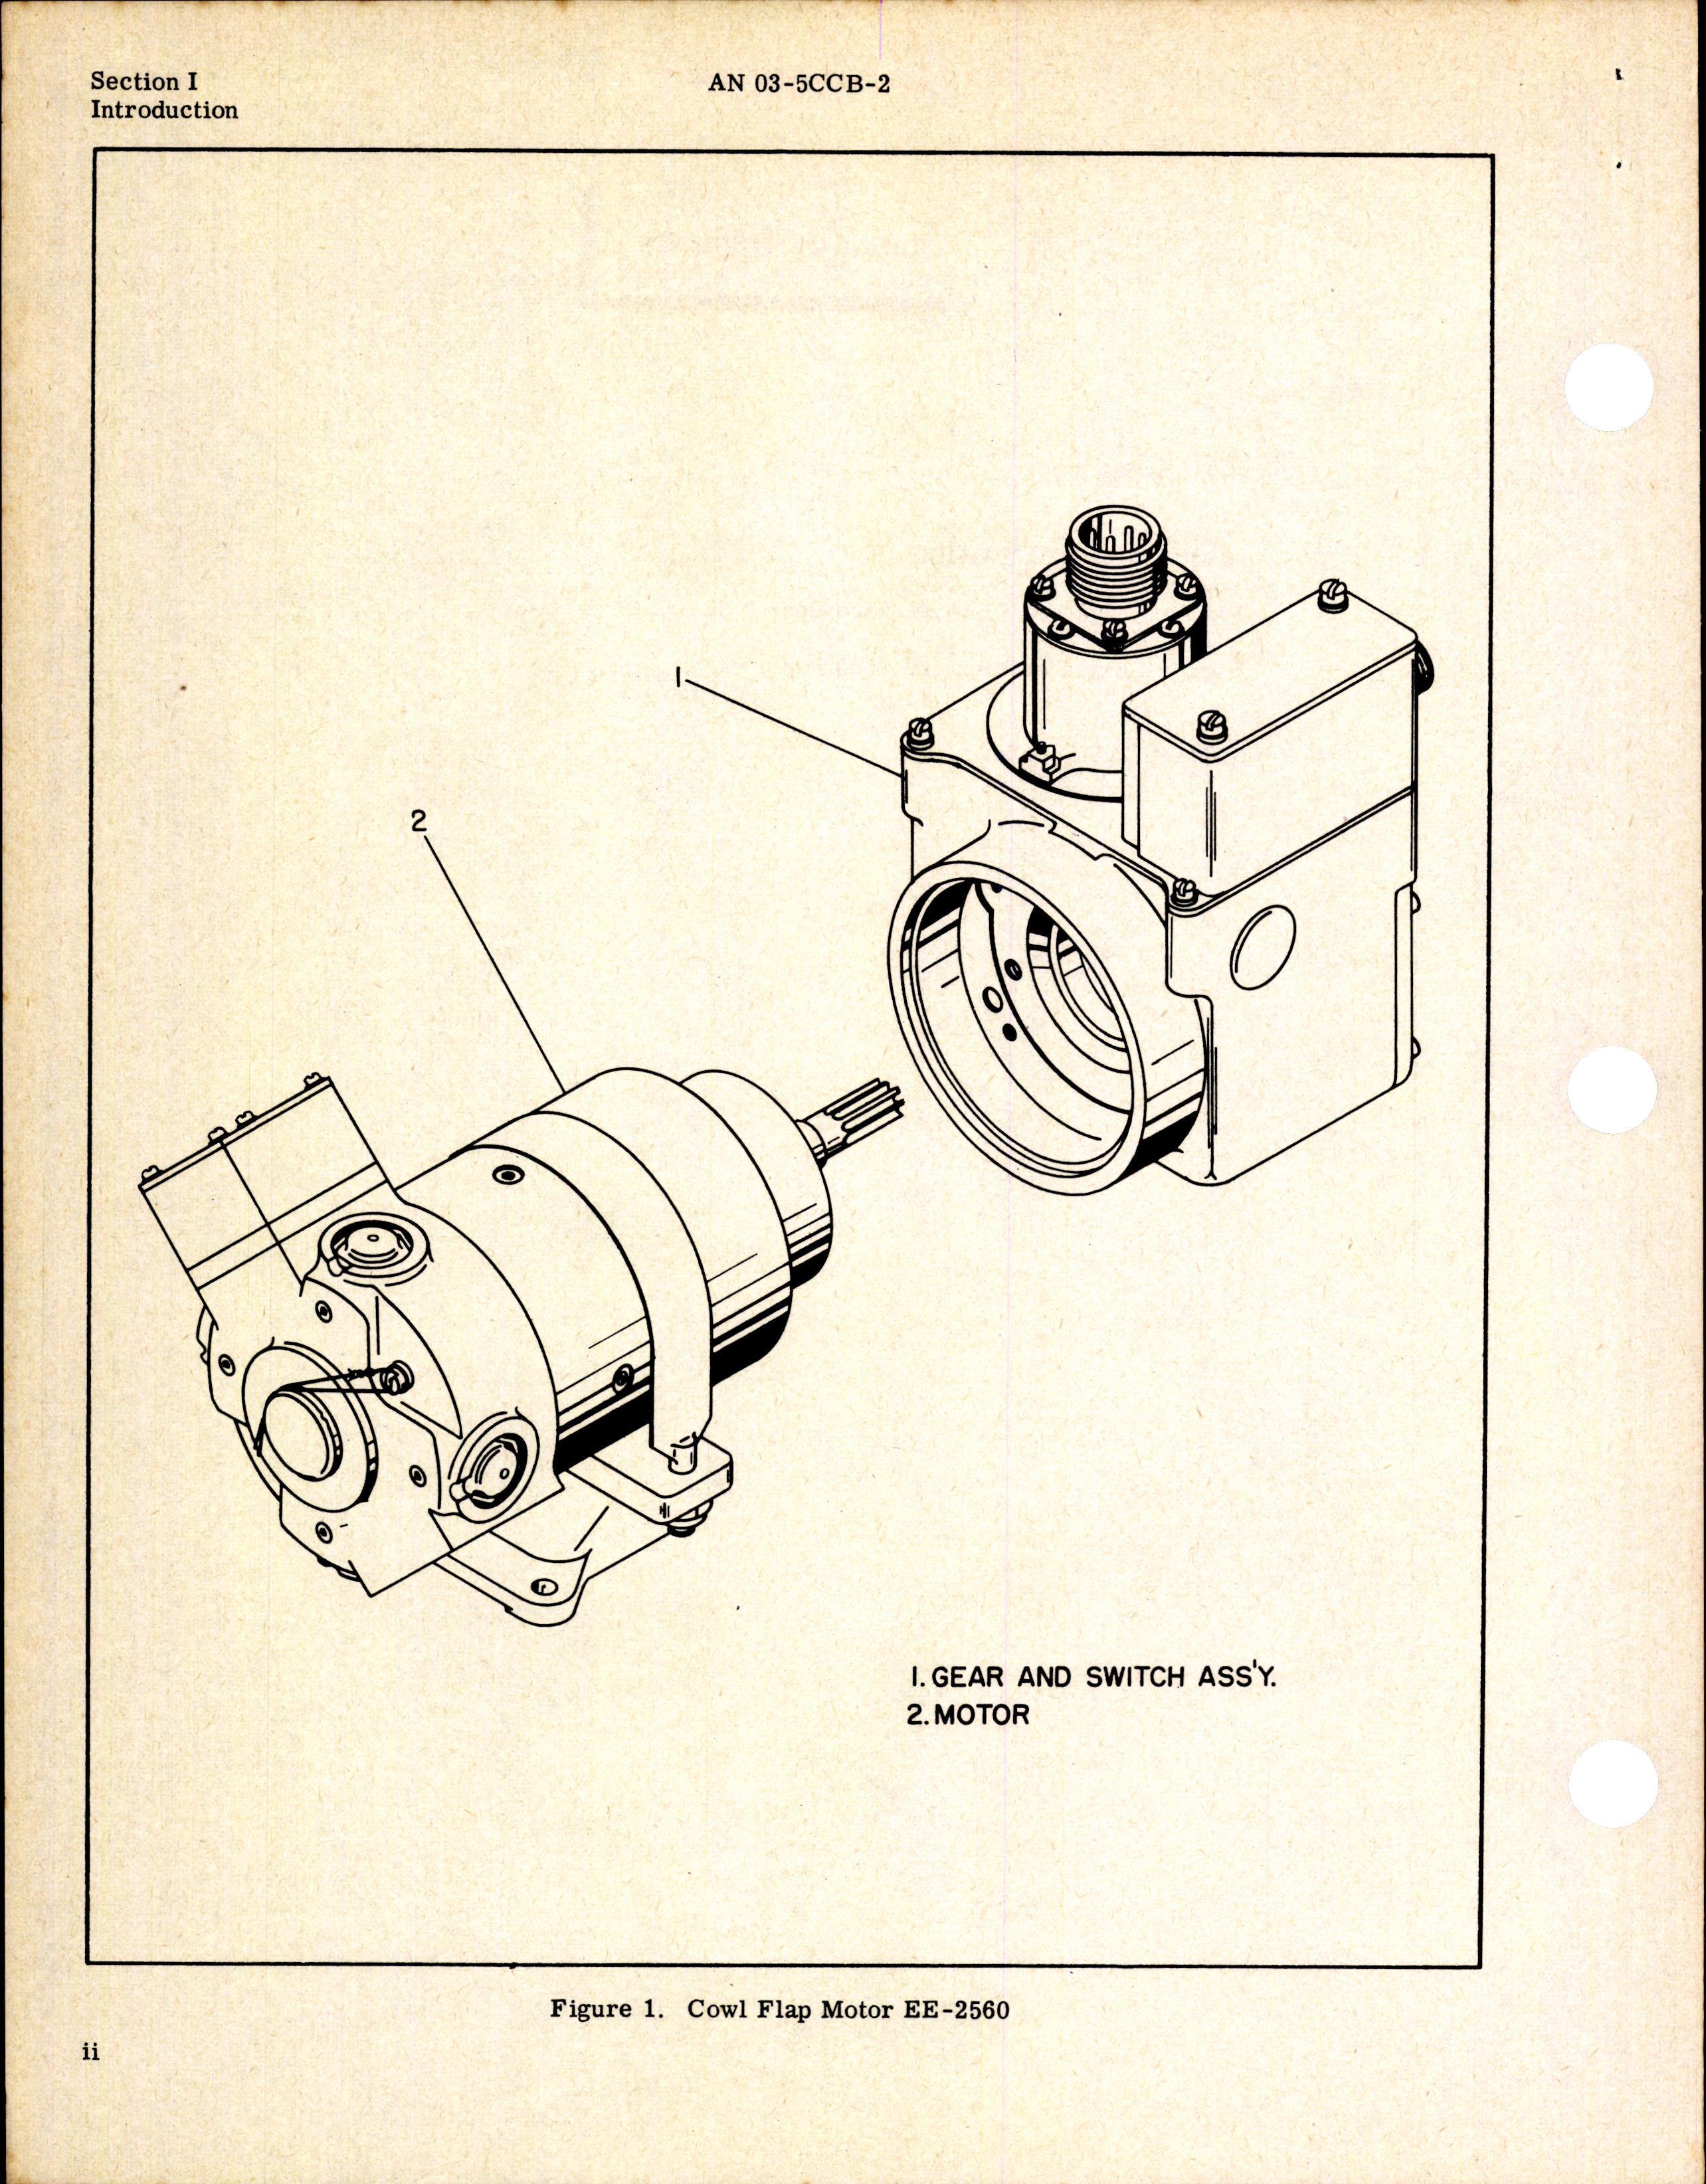 Sample page 4 from AirCorps Library document: Illustrated Parts Breakdown for Cowl Flap Motor